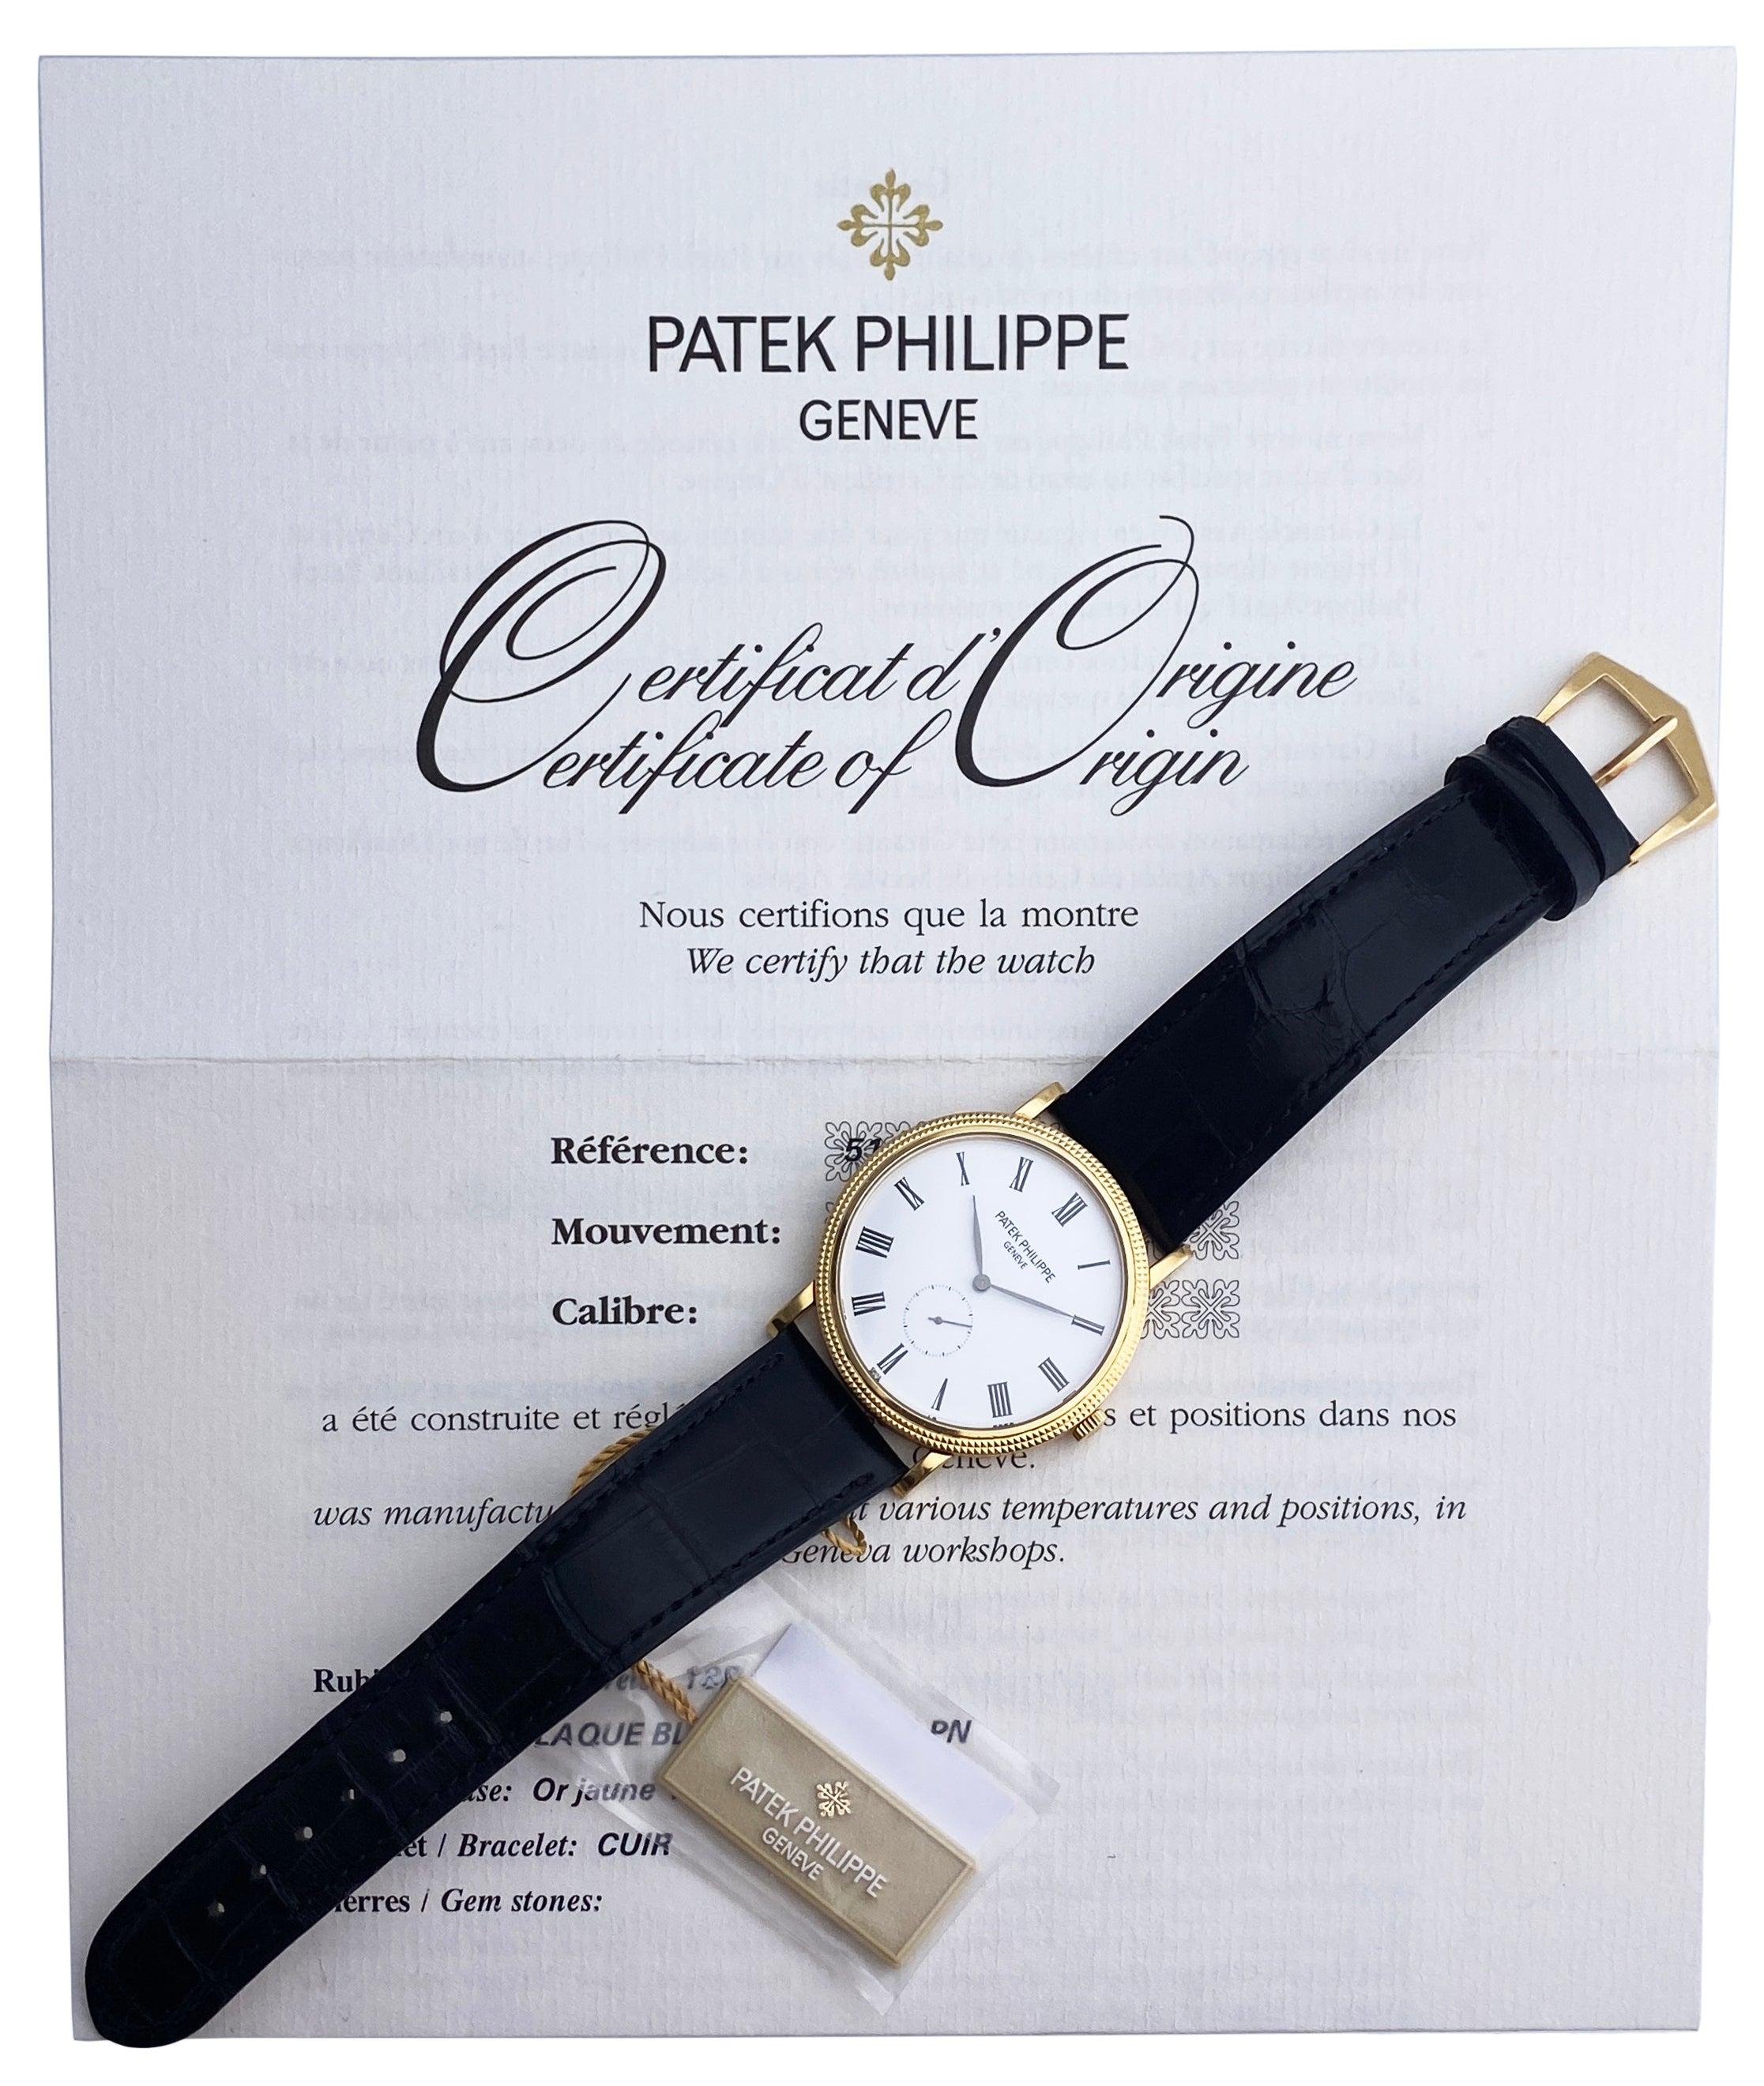 Patek Philippe Calatrava 5119J-001 Mens Watch. 36mm 18K yellow gold case with Hobnail patterned bezel. White dial with black steel hands and Roman numeral hour markers. Small second sub-dial. Black Leather strap with 18K yellow gold buckle. Will fit